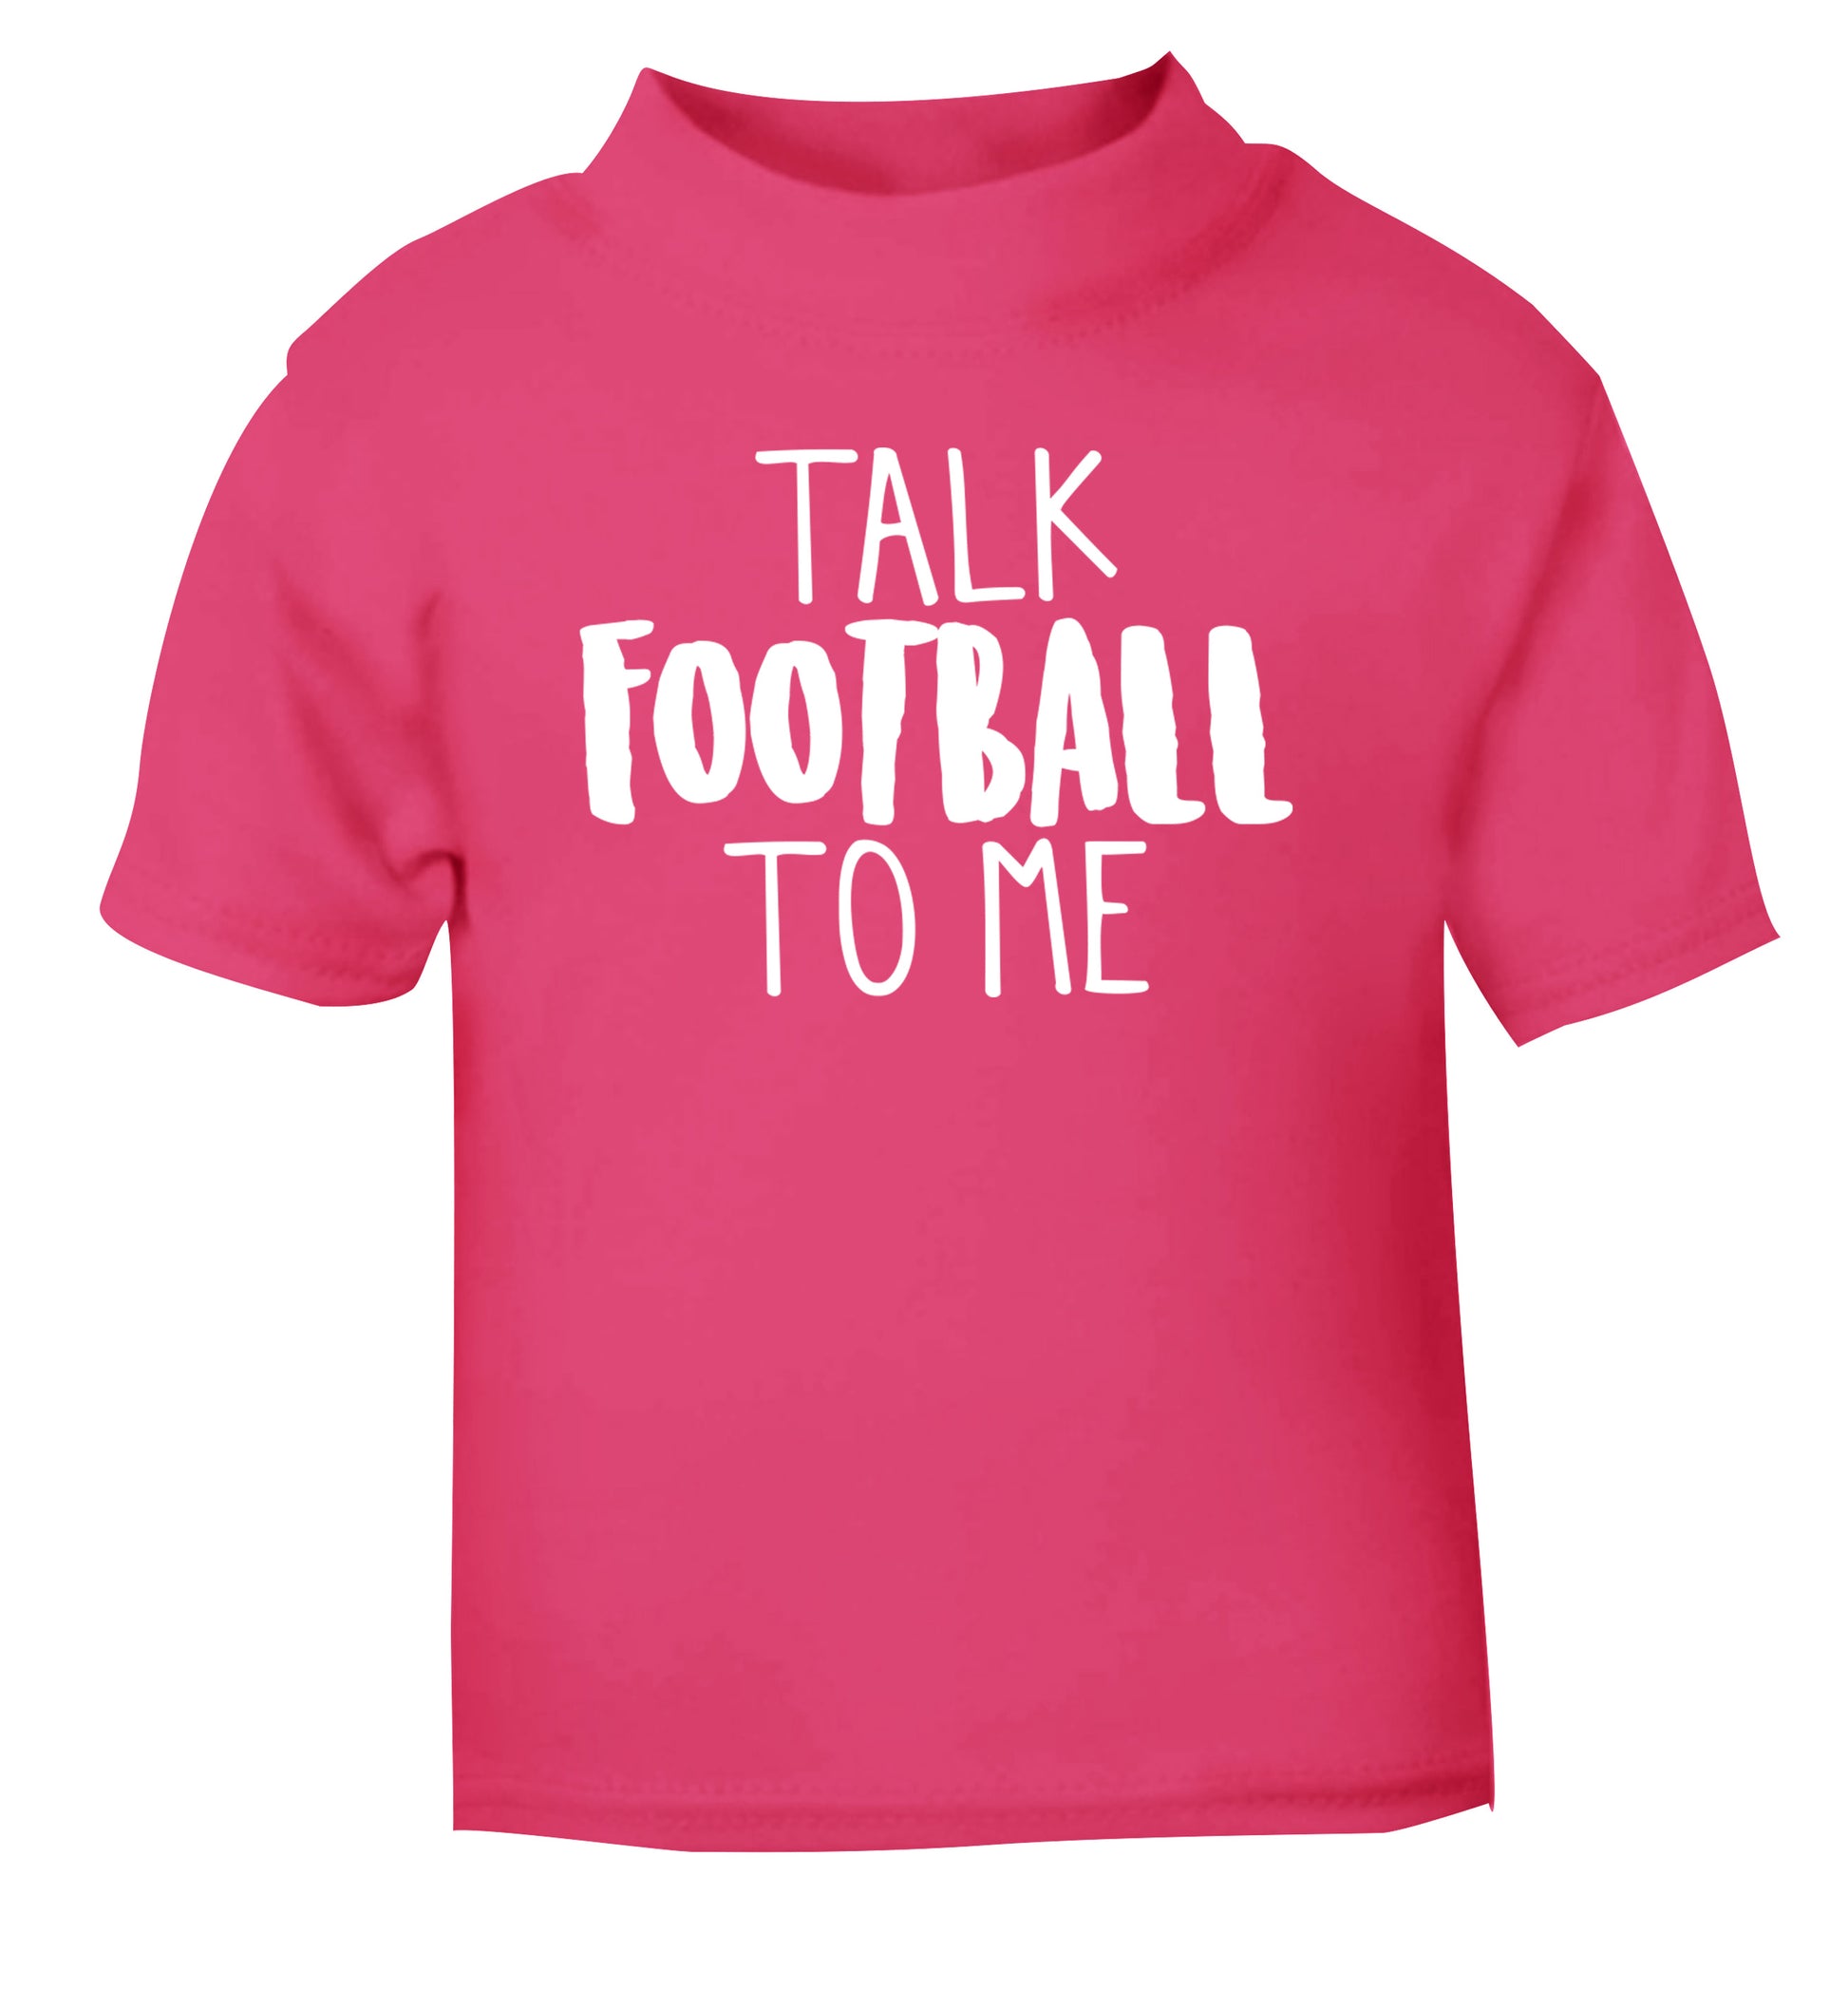 Talk football to me pink Baby Toddler Tshirt 2 Years